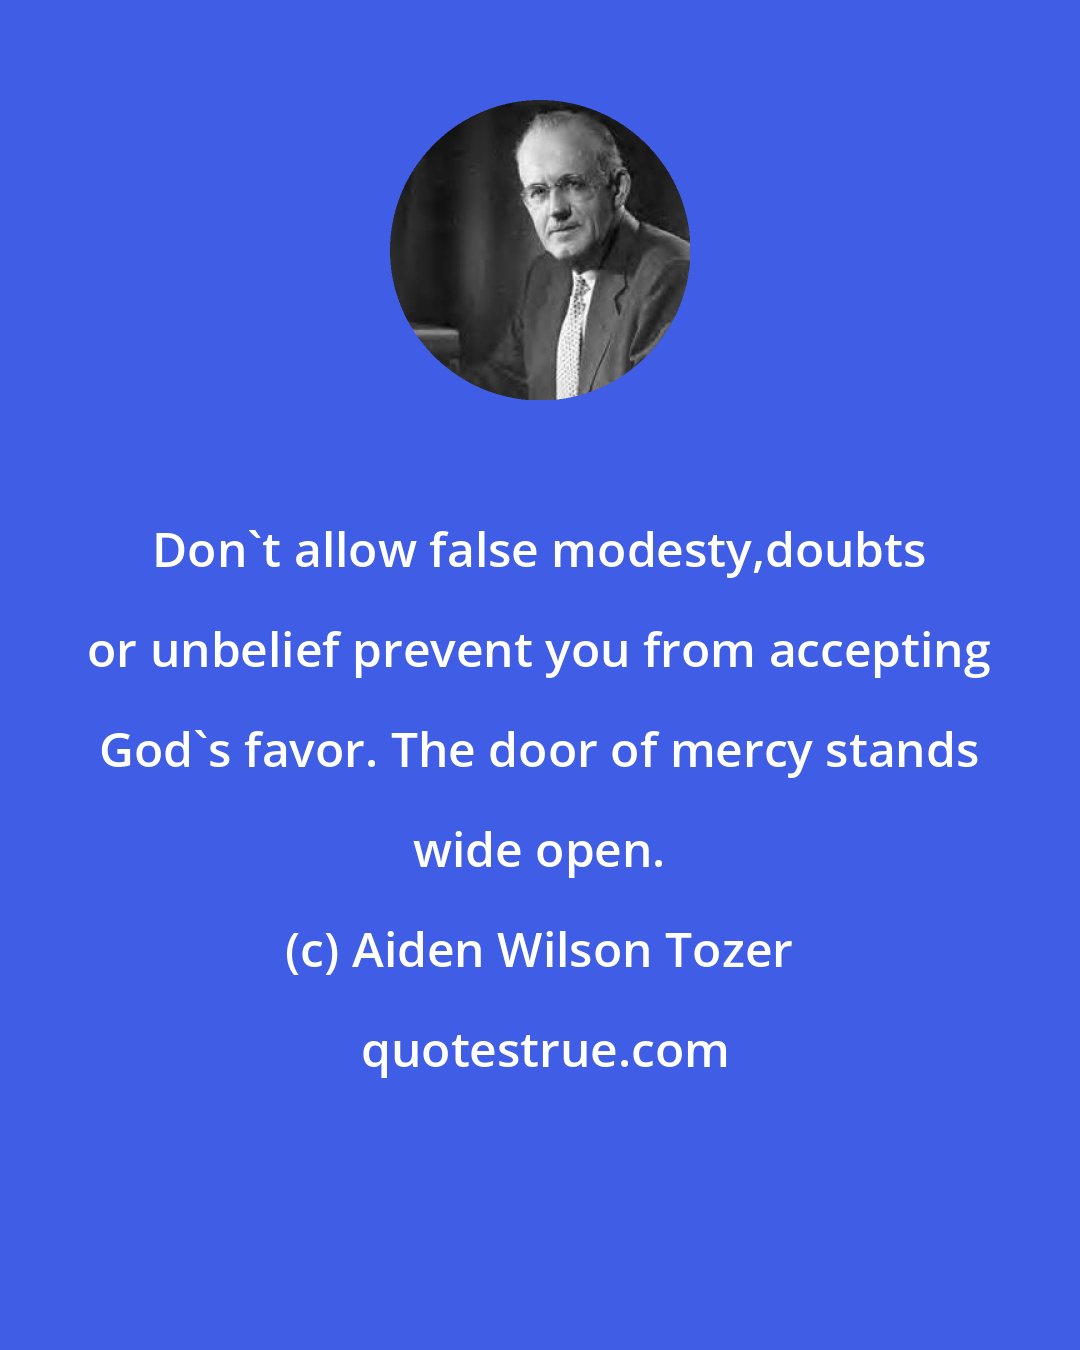 Aiden Wilson Tozer: Don't allow false modesty,doubts or unbelief prevent you from accepting God's favor. The door of mercy stands wide open.